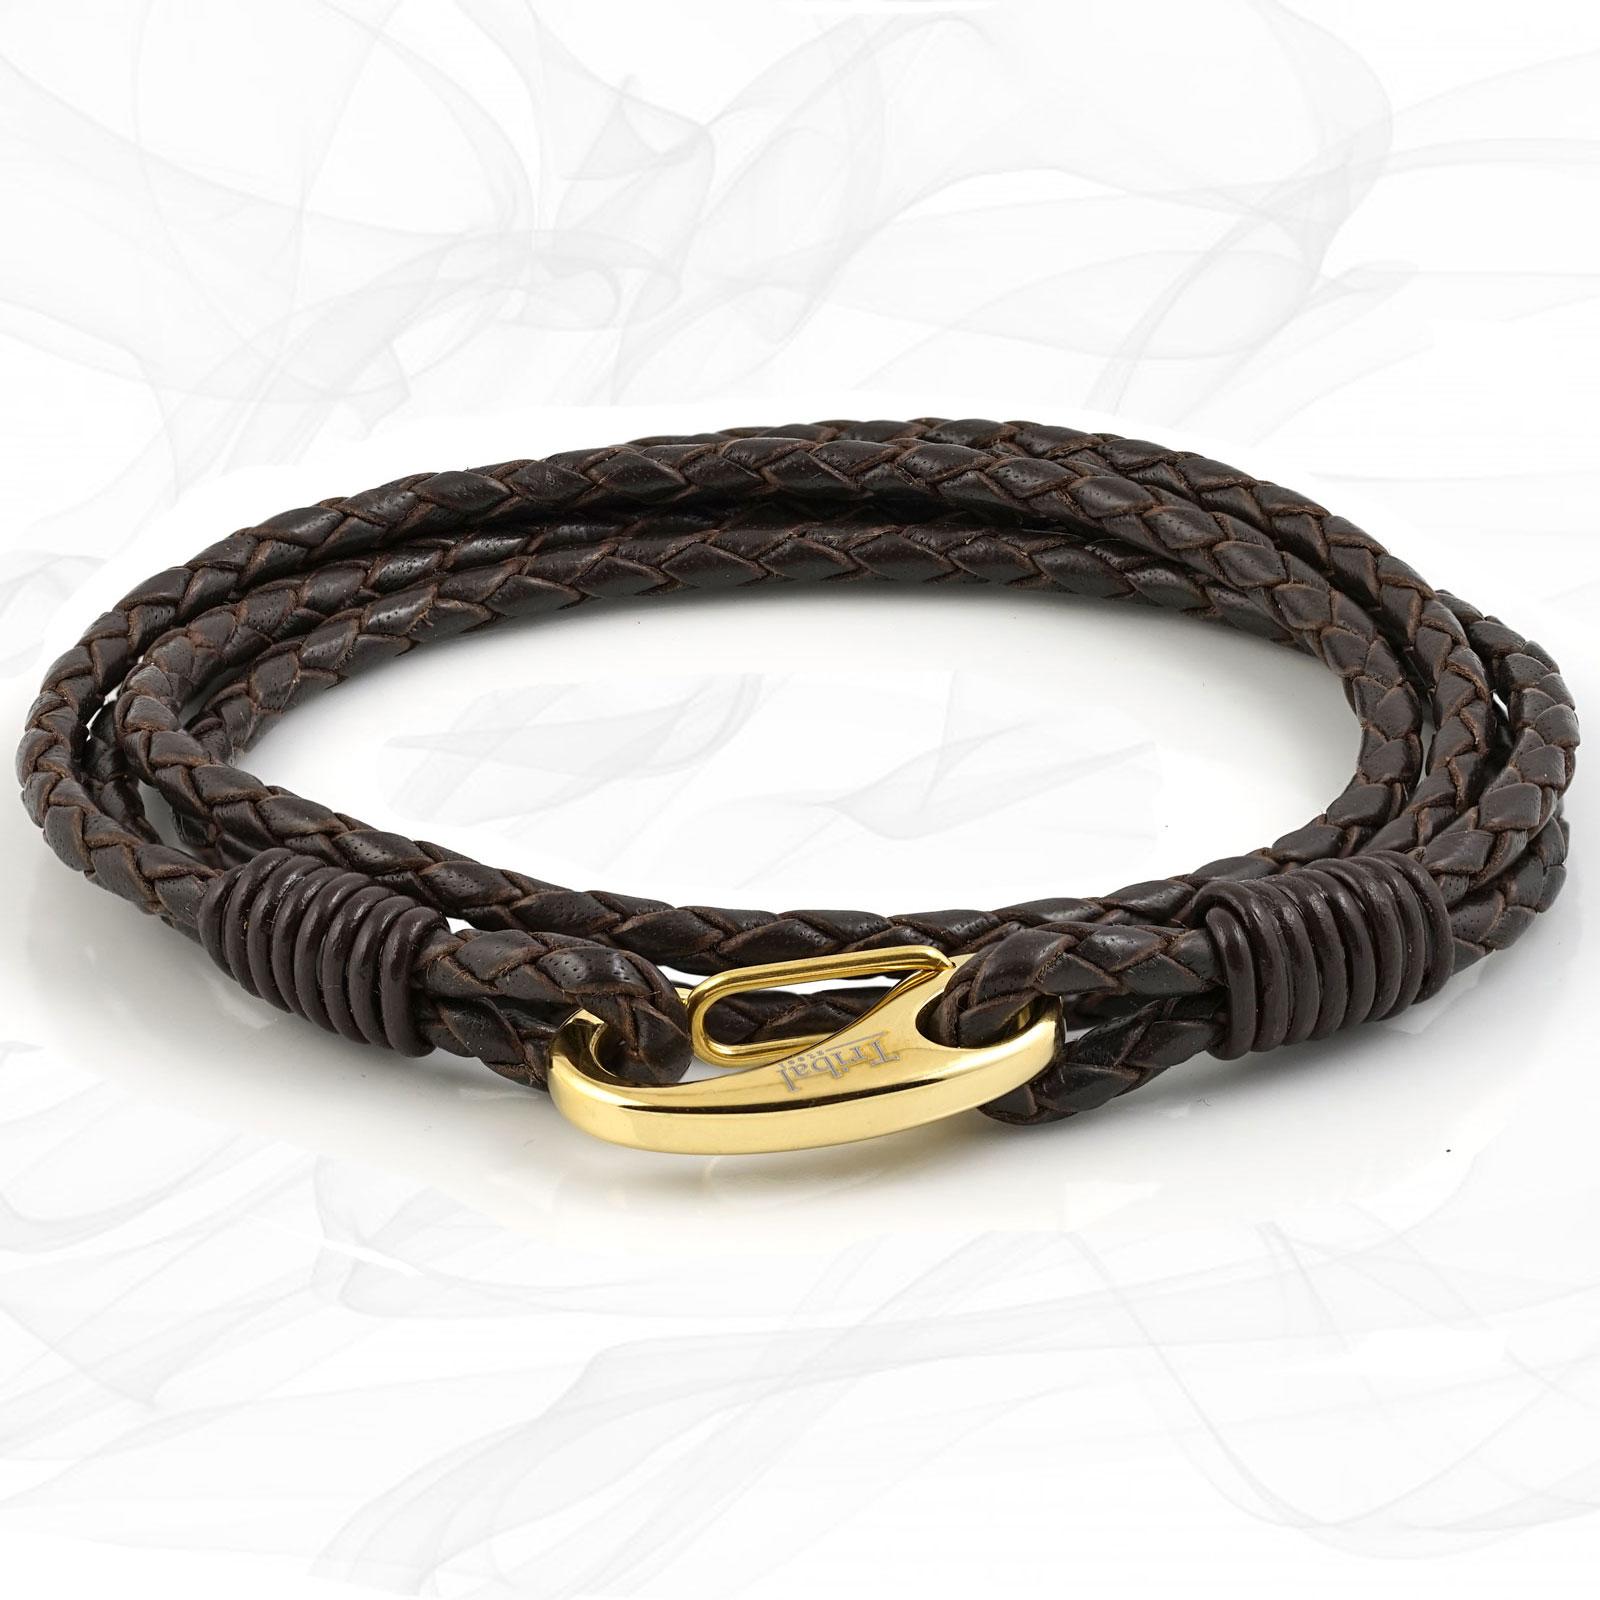 Mens Elegant Brown Quad Wrap Bolo Leather Bracelet with Gold Colored Steel Lobster Clasp by Tribal Steel